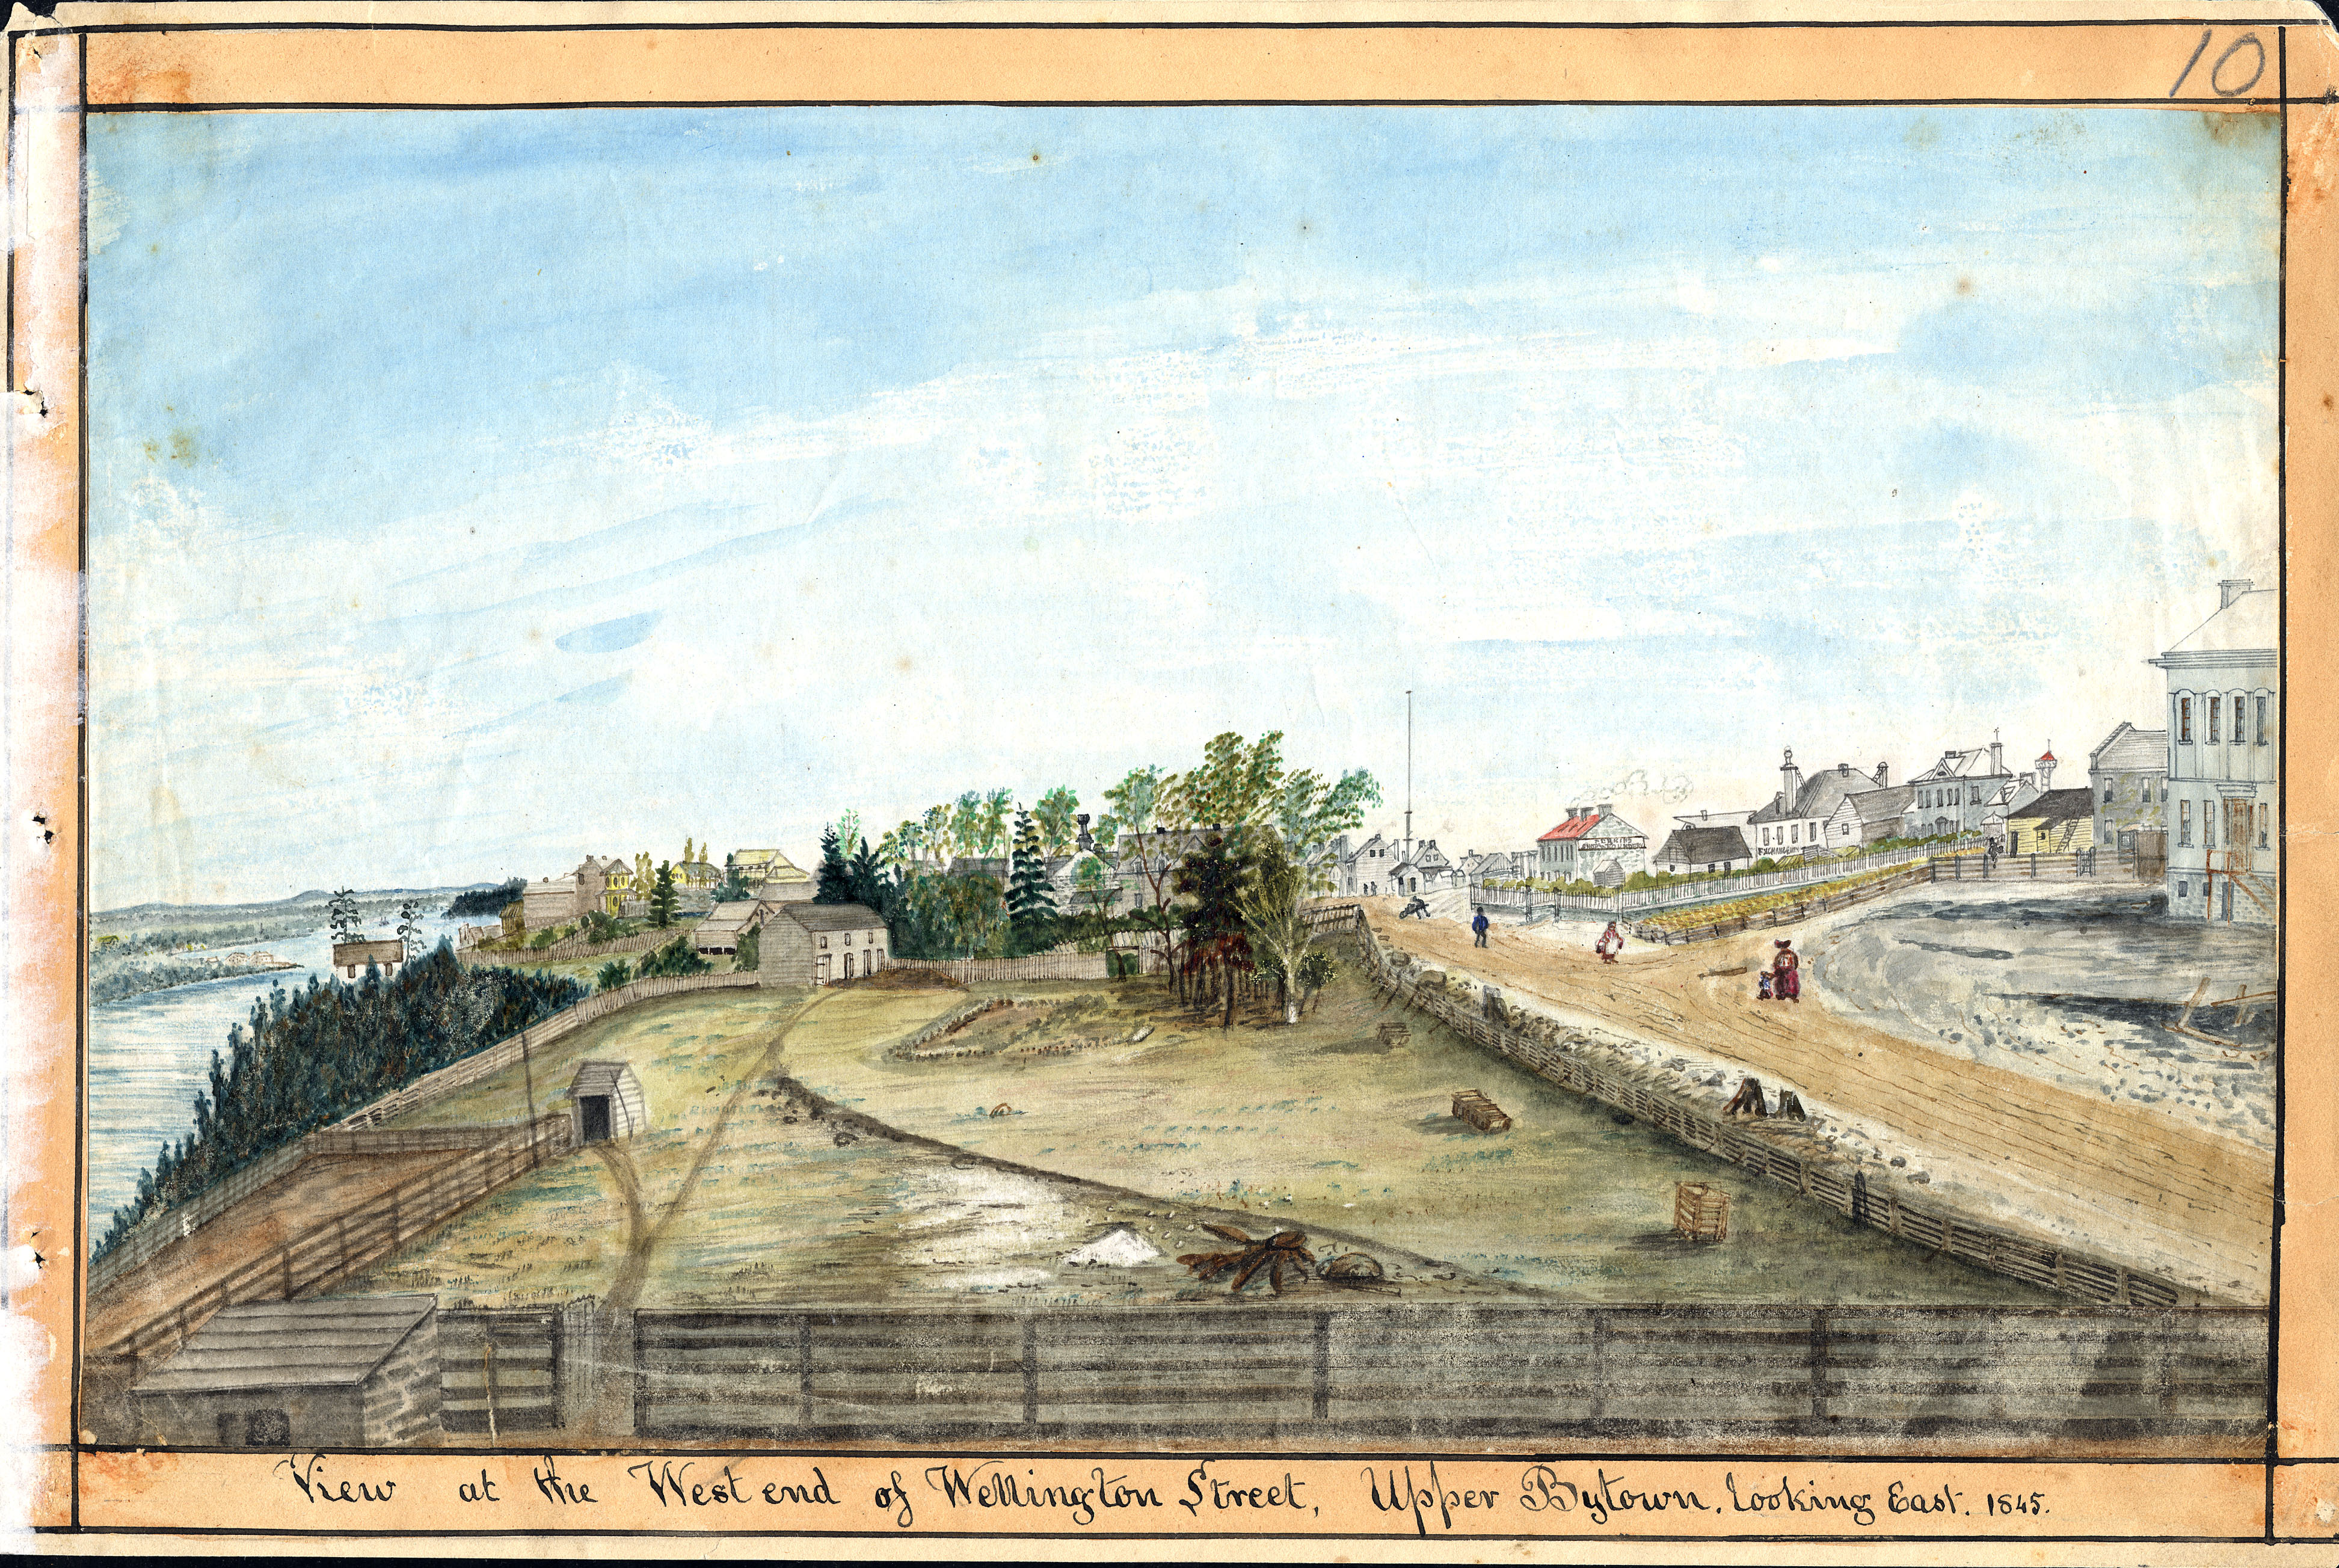 View from Wellington Street, Upper Bytown ca. 1845.  Thomas Burrowes, Painting of a view from Wellington Street, Upper Bytown, ca. 1845. Thomas Burrowes fonds.  Archives of Ontario, C 1-0-0-0-10.